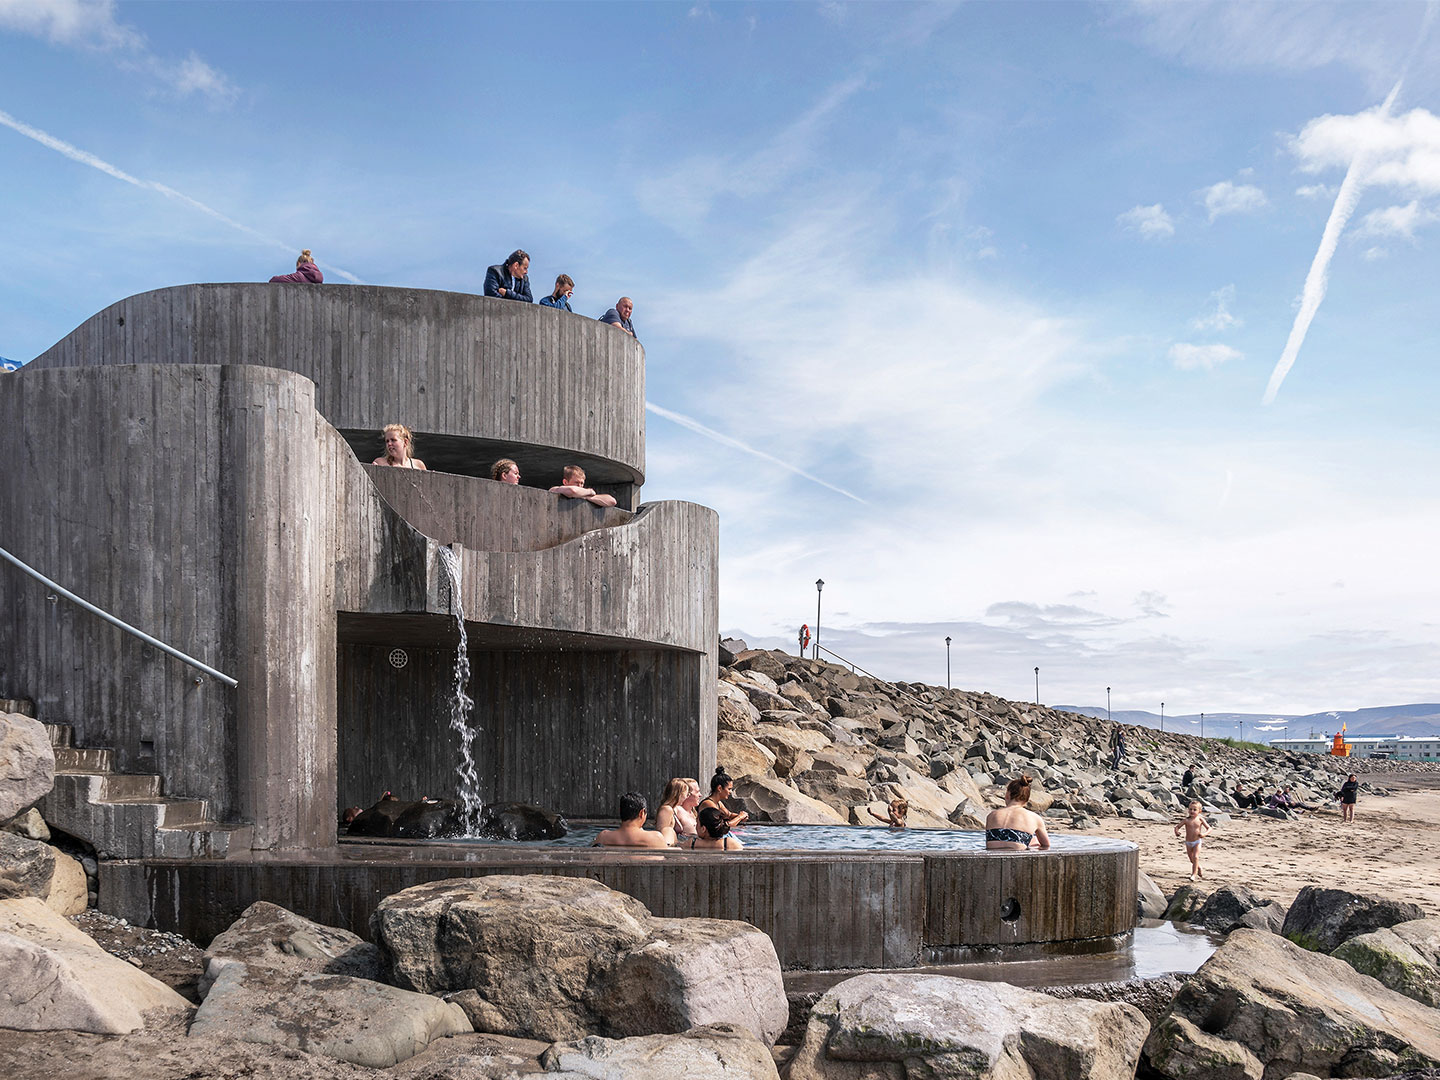 Guolaug baths by Basalt Architects in Iceland